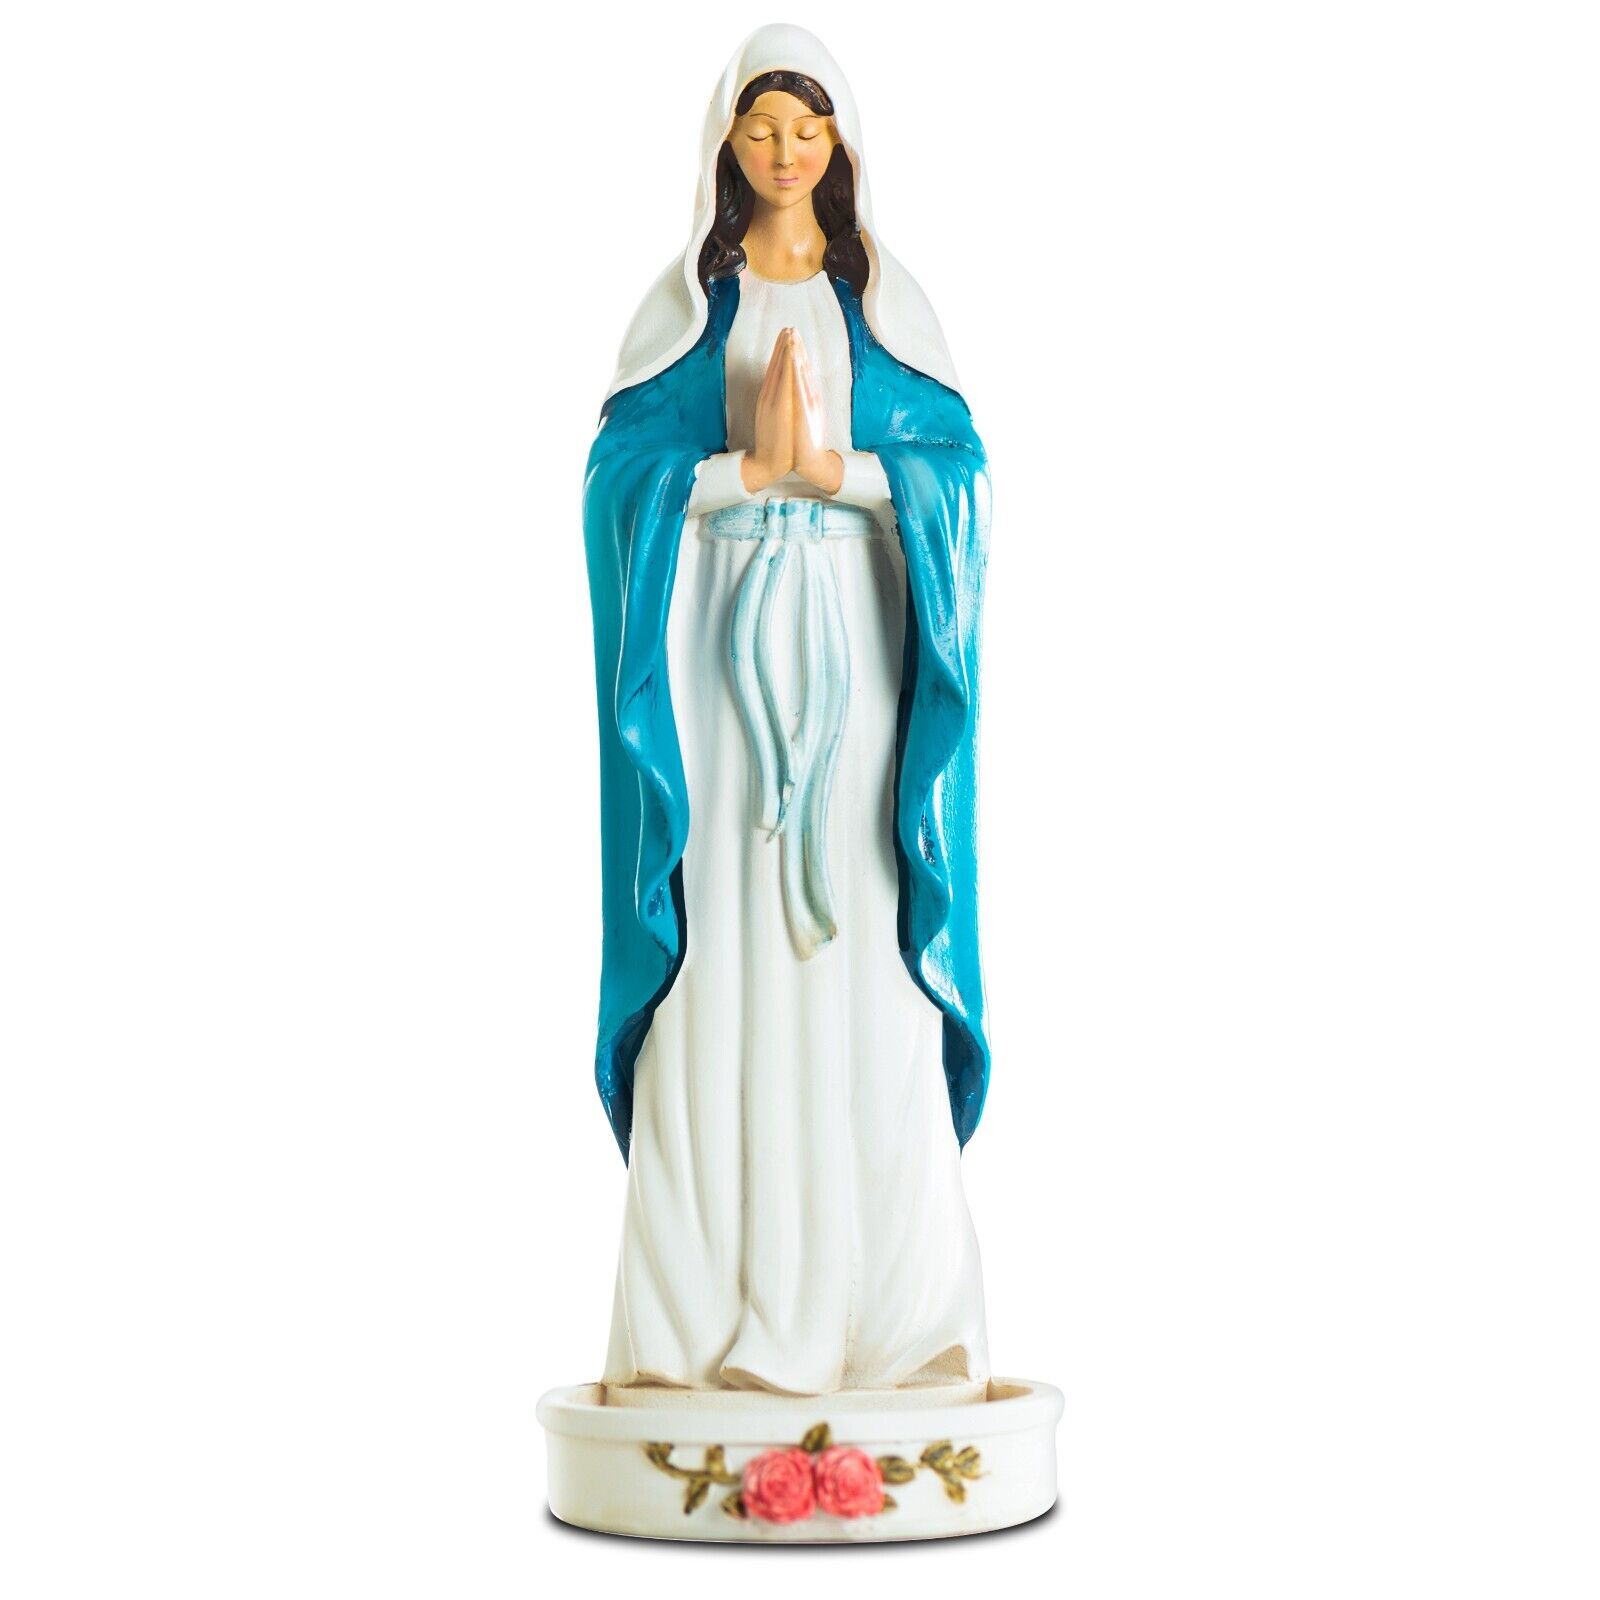 Virgin Mary Statue - Rosary Holder Statue- Catholic Gifts - Blessed Mother